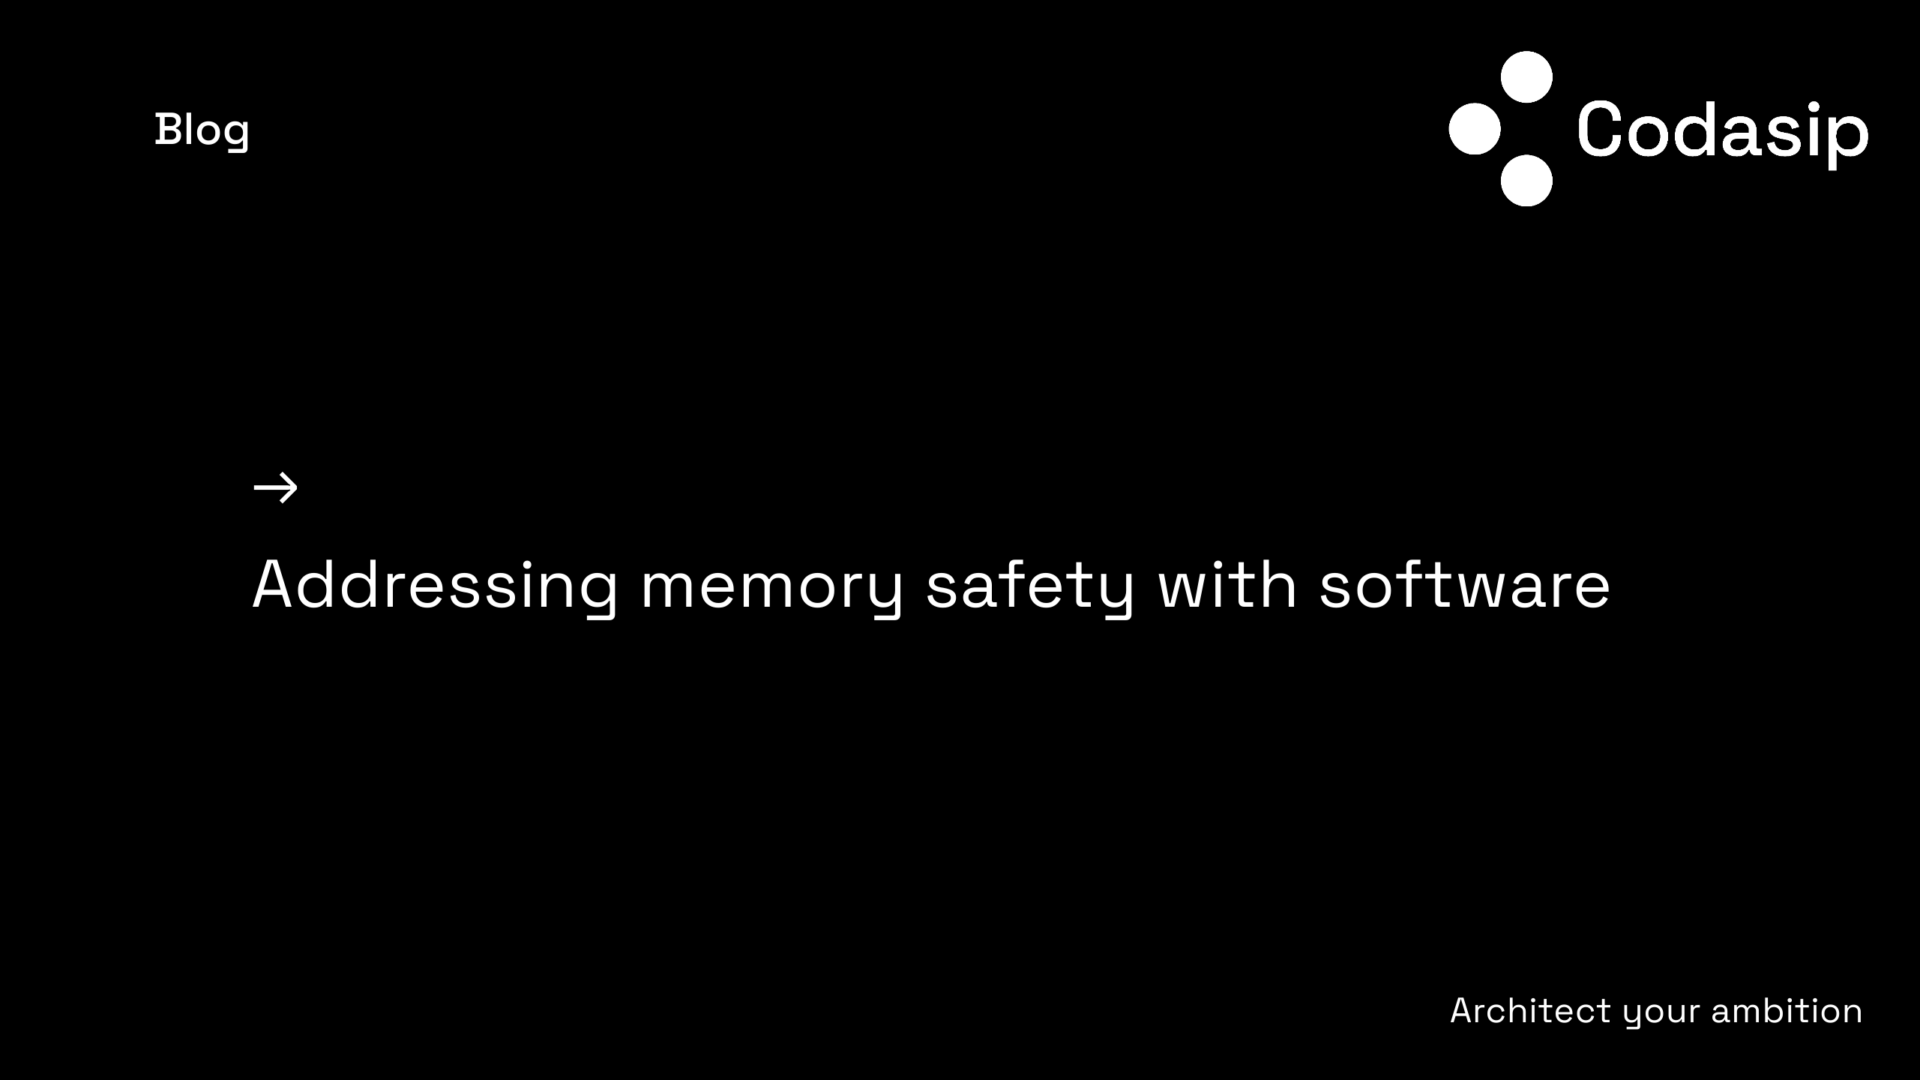 Blog featured image - Addressing memory safety with software